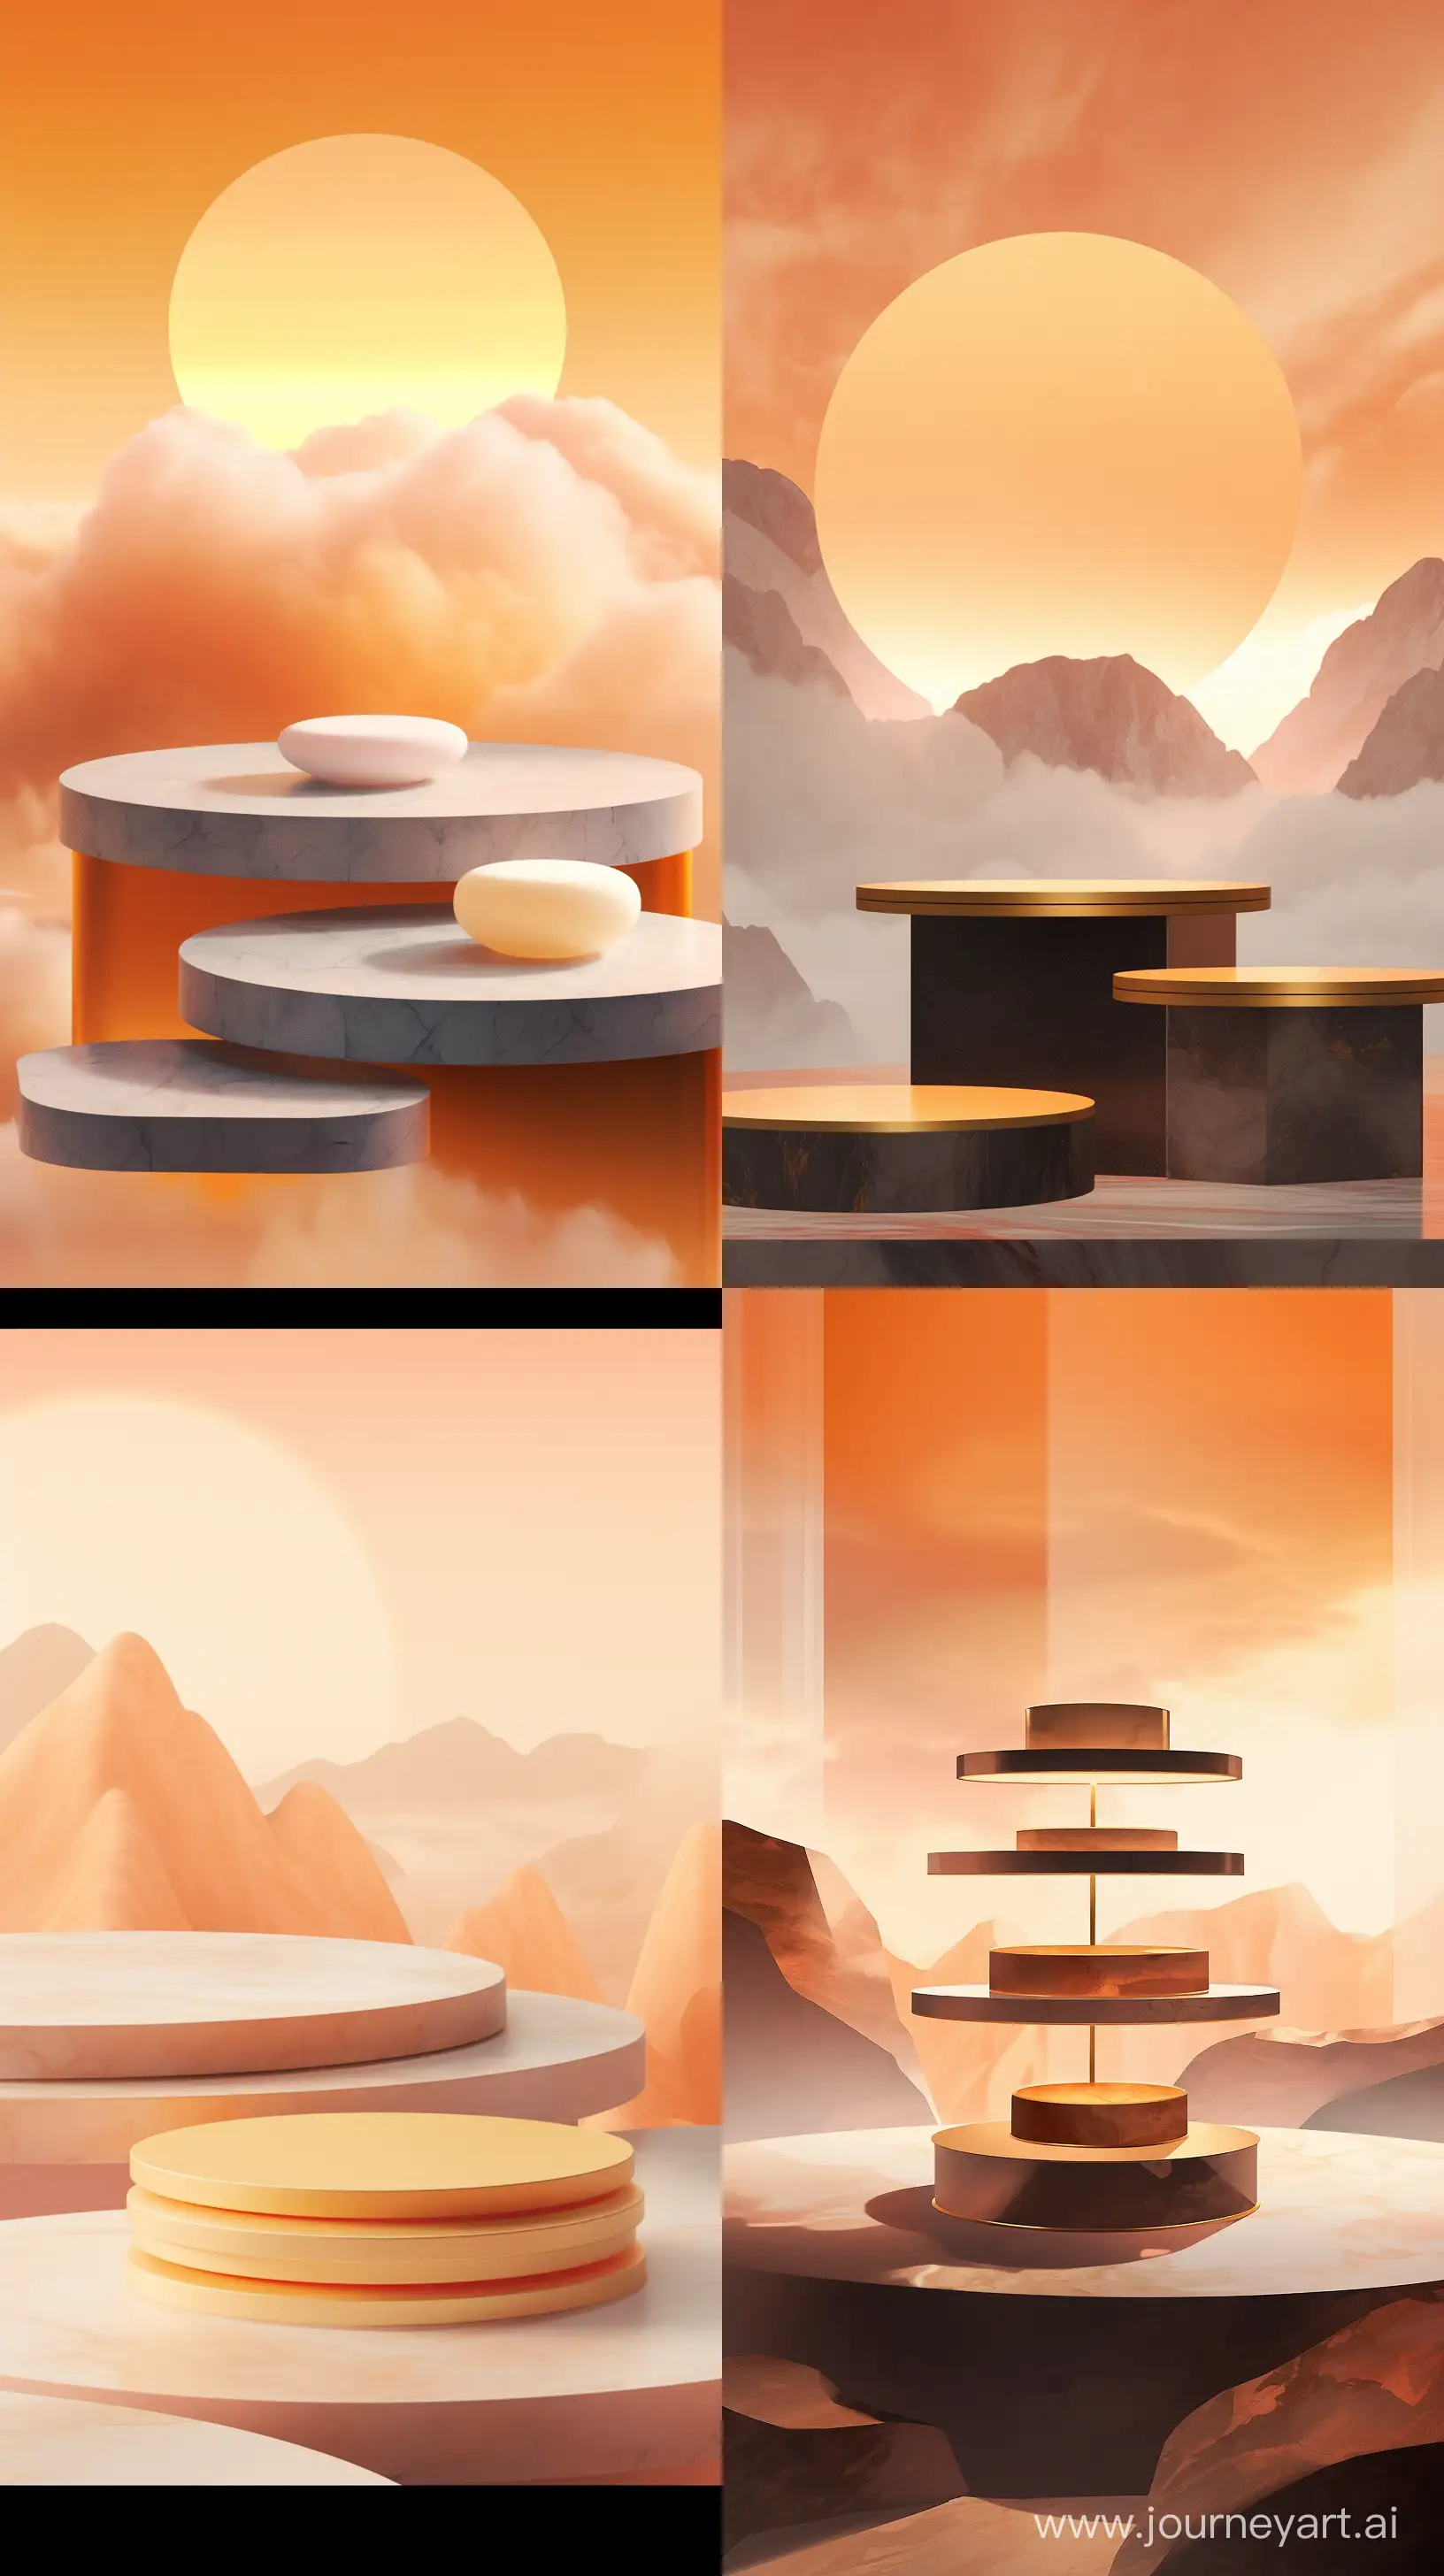 Three marble product display platforms in a modern setting. The platforms are made of dark brown marble with simple, minimalist designs. The background is a gradient of orange and yellow, reminiscent of a desert sunset. It creates a soft, gentle, calm, dreamy and charming atmosphere. --ar 9:16 --s 200 --niji